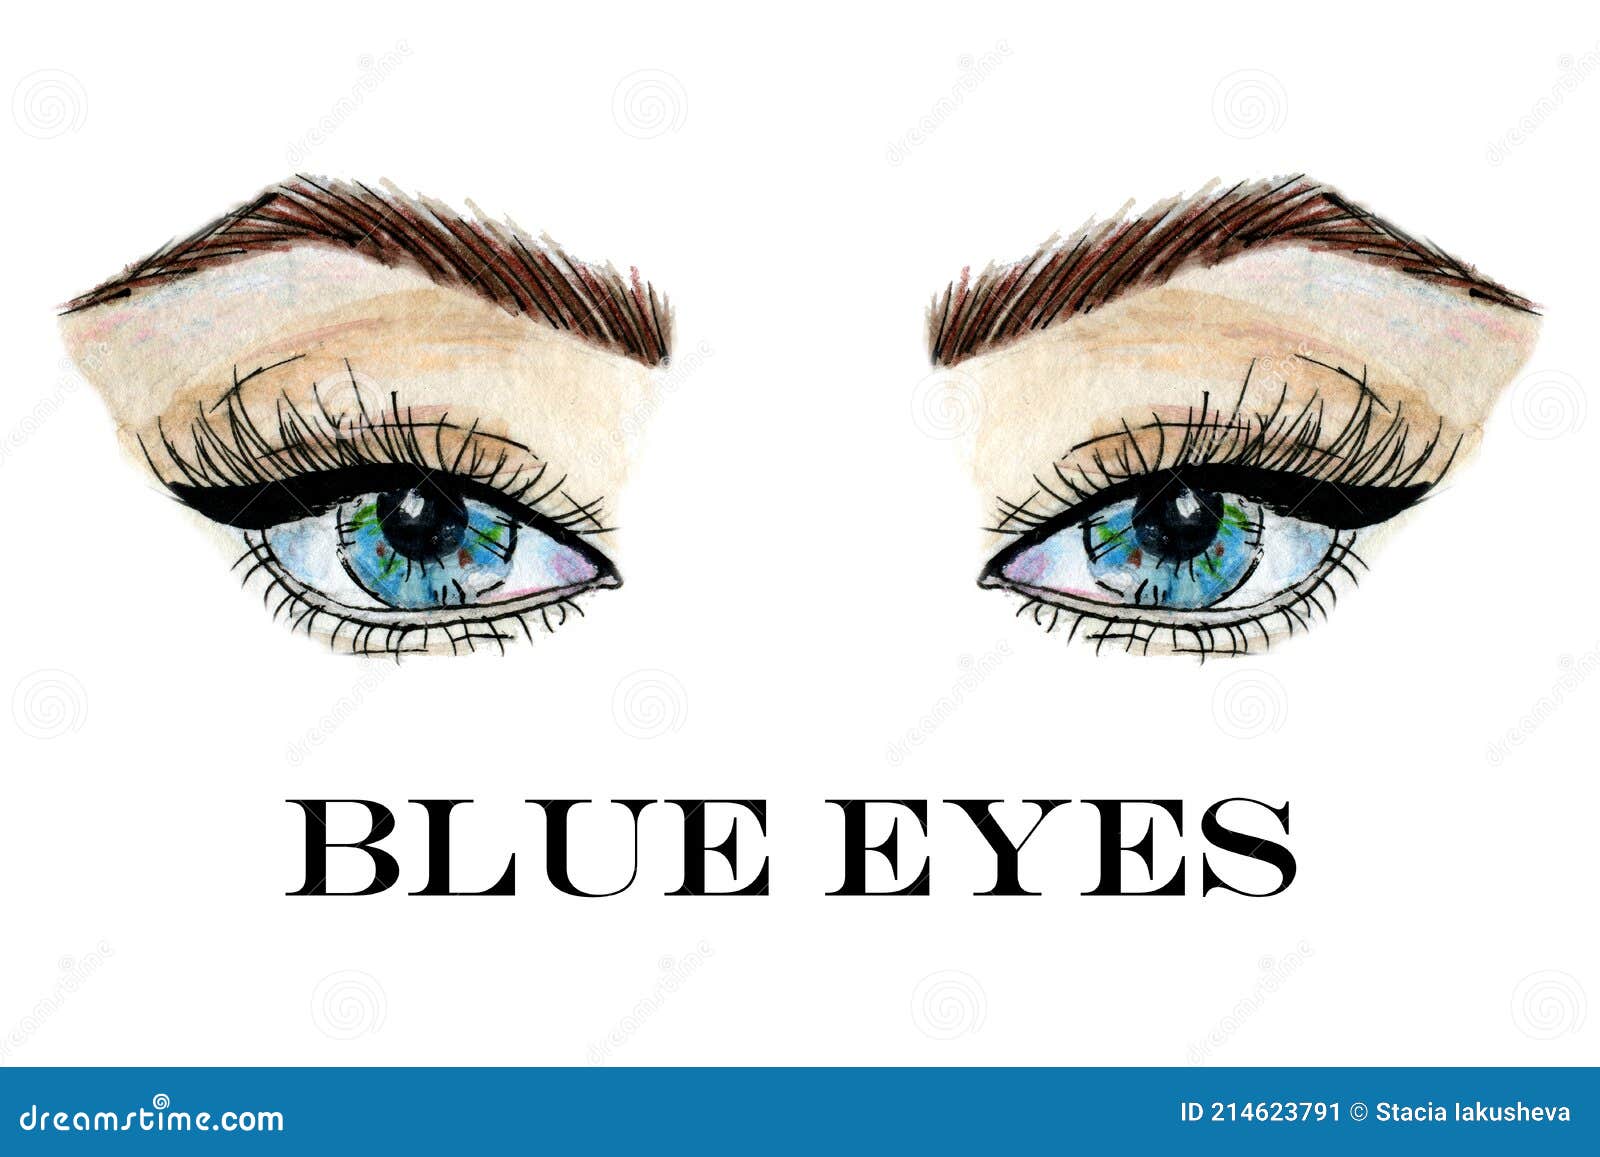 8. How to Make Deep Blue Eyes Pop with Dark Hair - wide 2